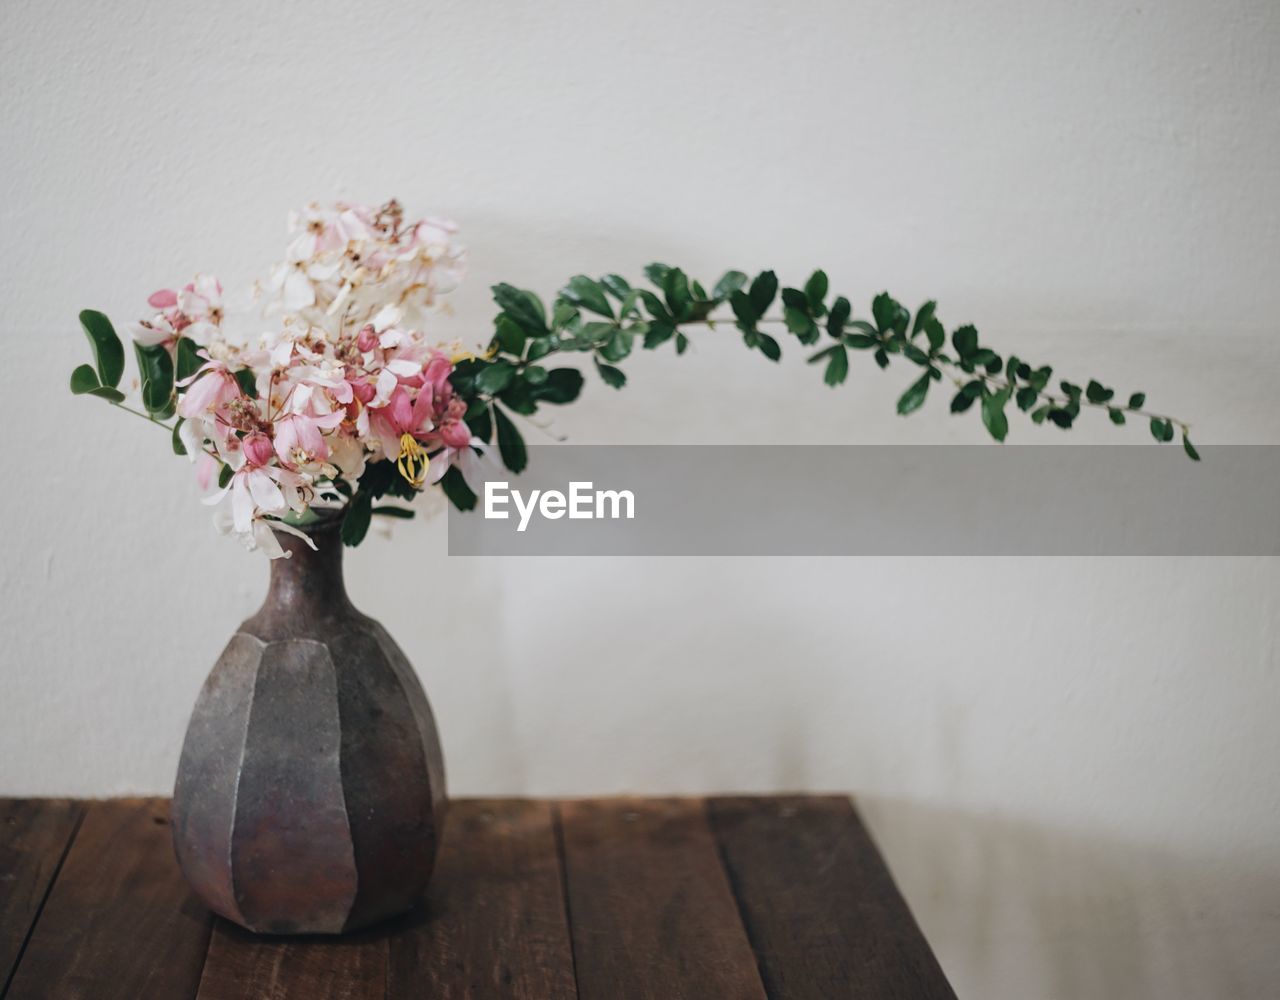 CLOSE-UP OF FLOWER VASE ON TABLE